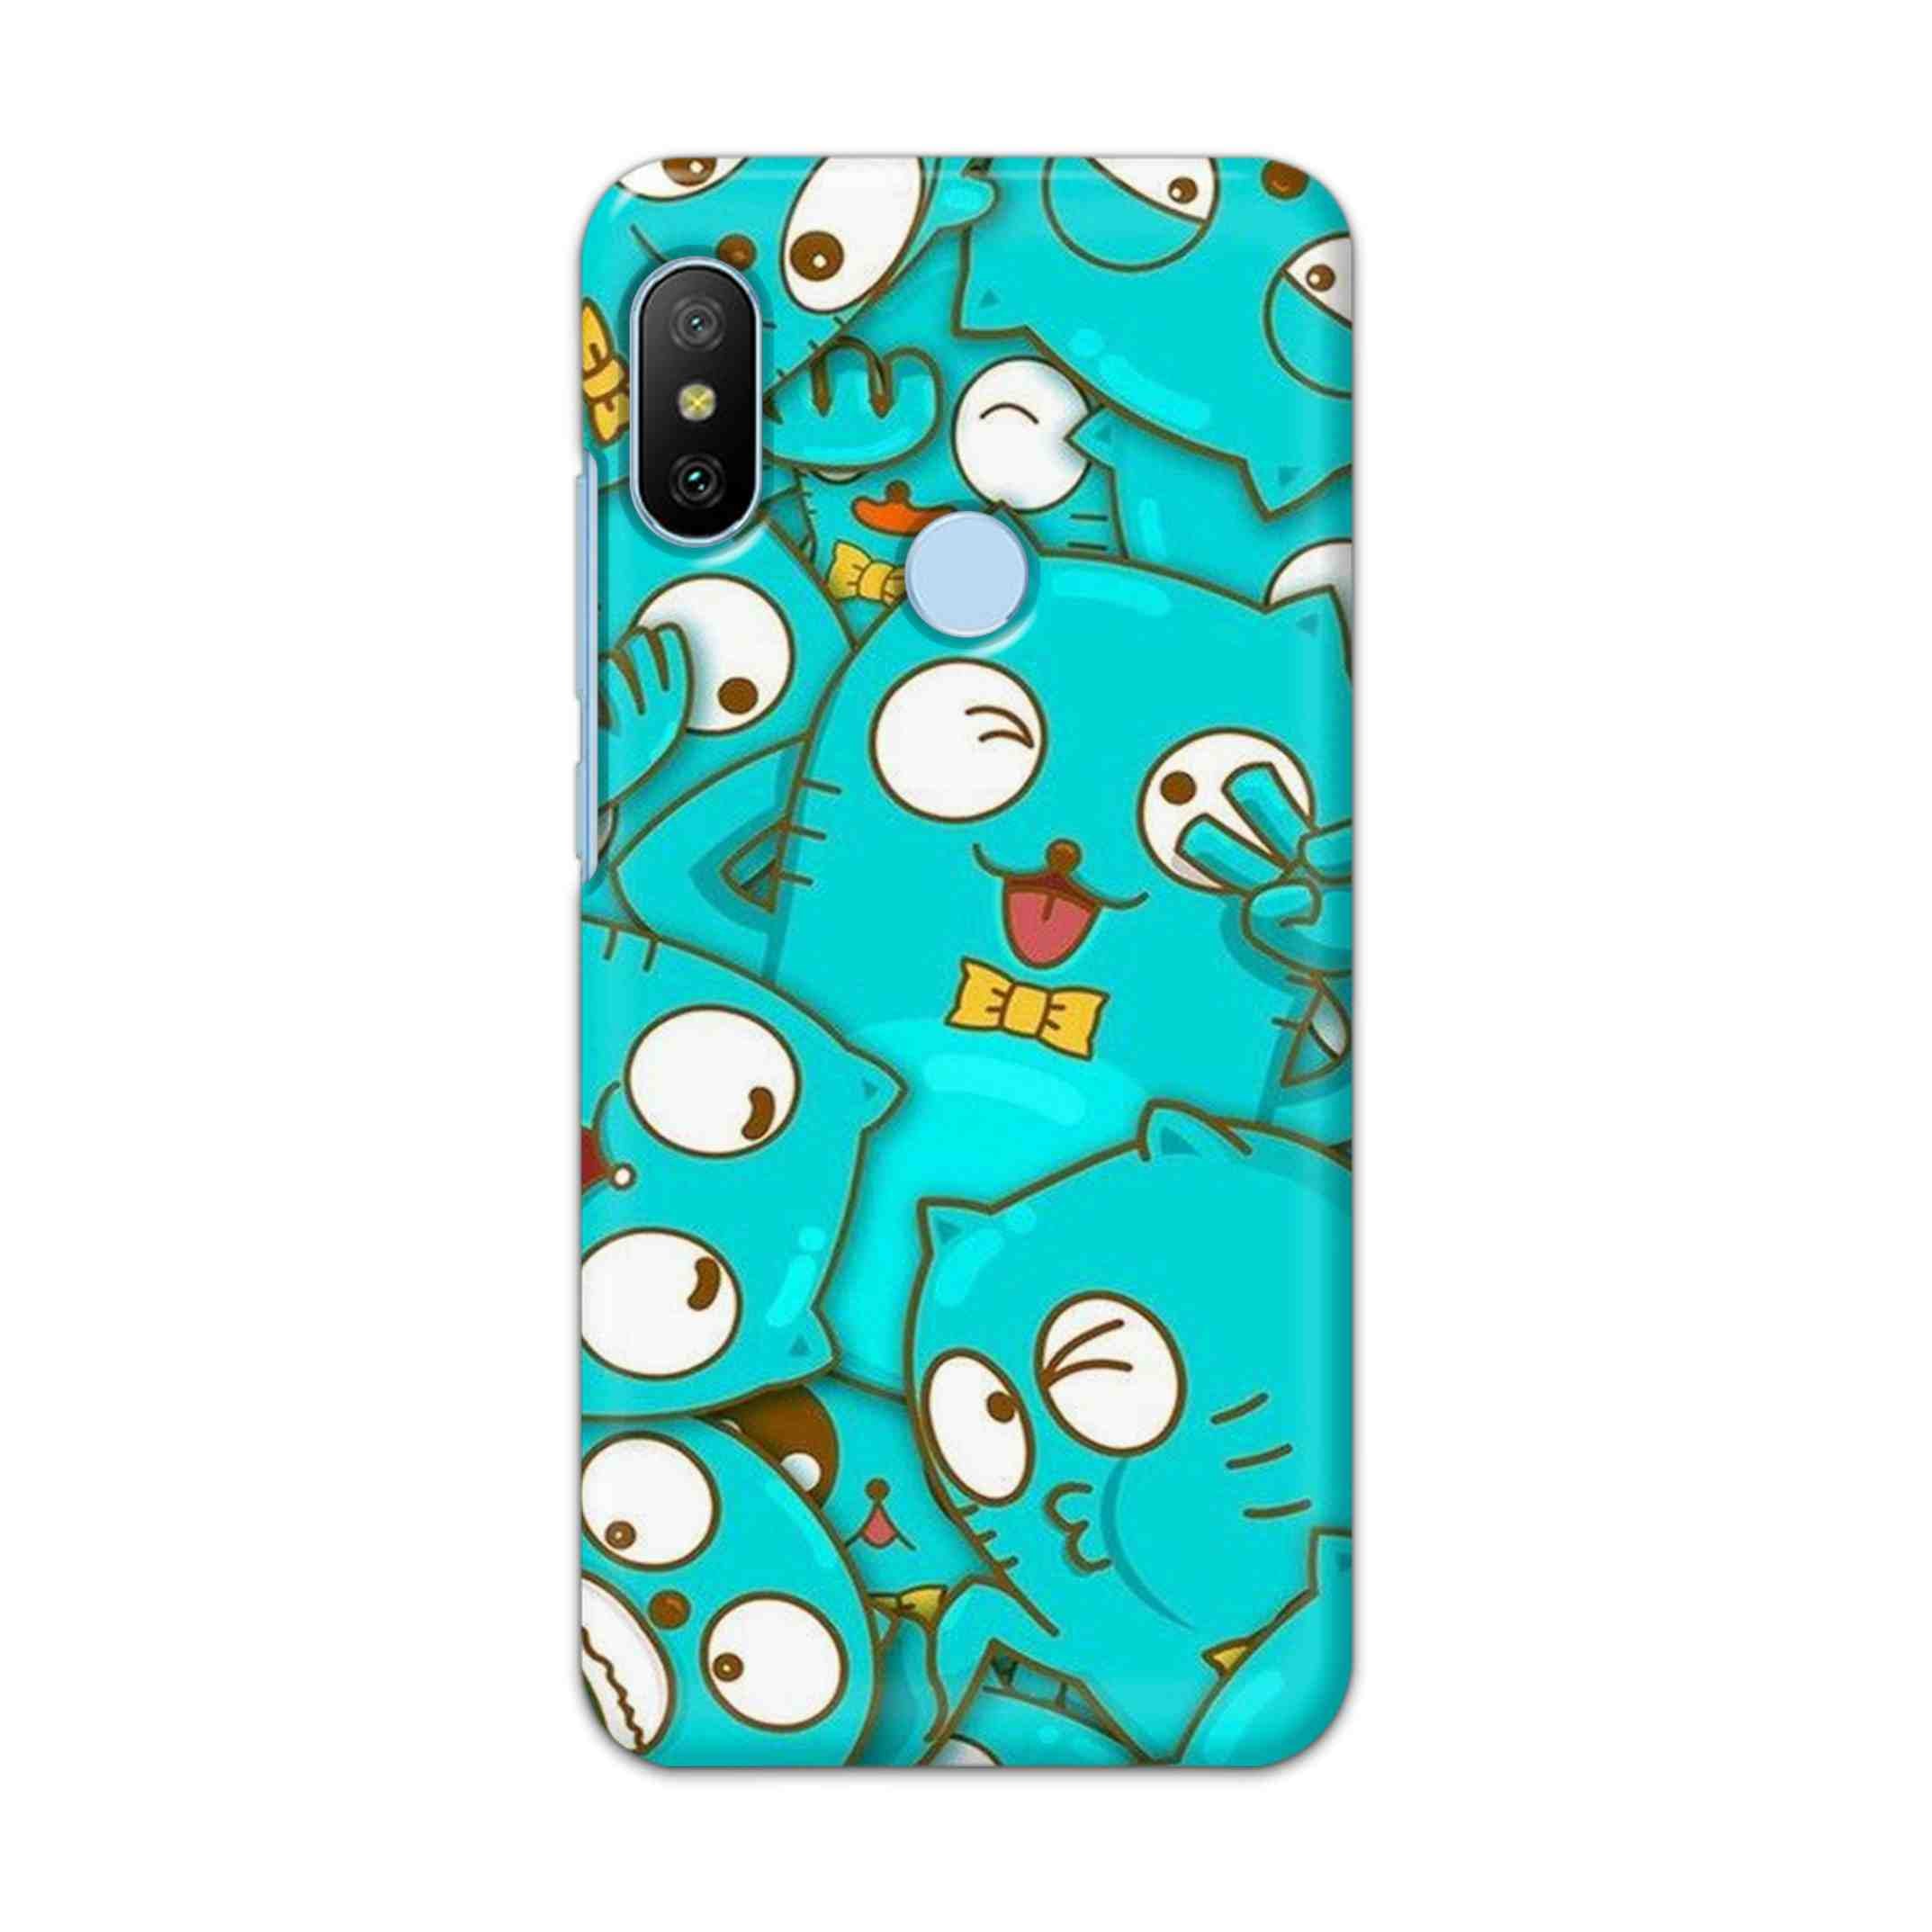 Buy Cat Hard Back Mobile Phone Case/Cover For Xiaomi Redmi 6 Pro Online